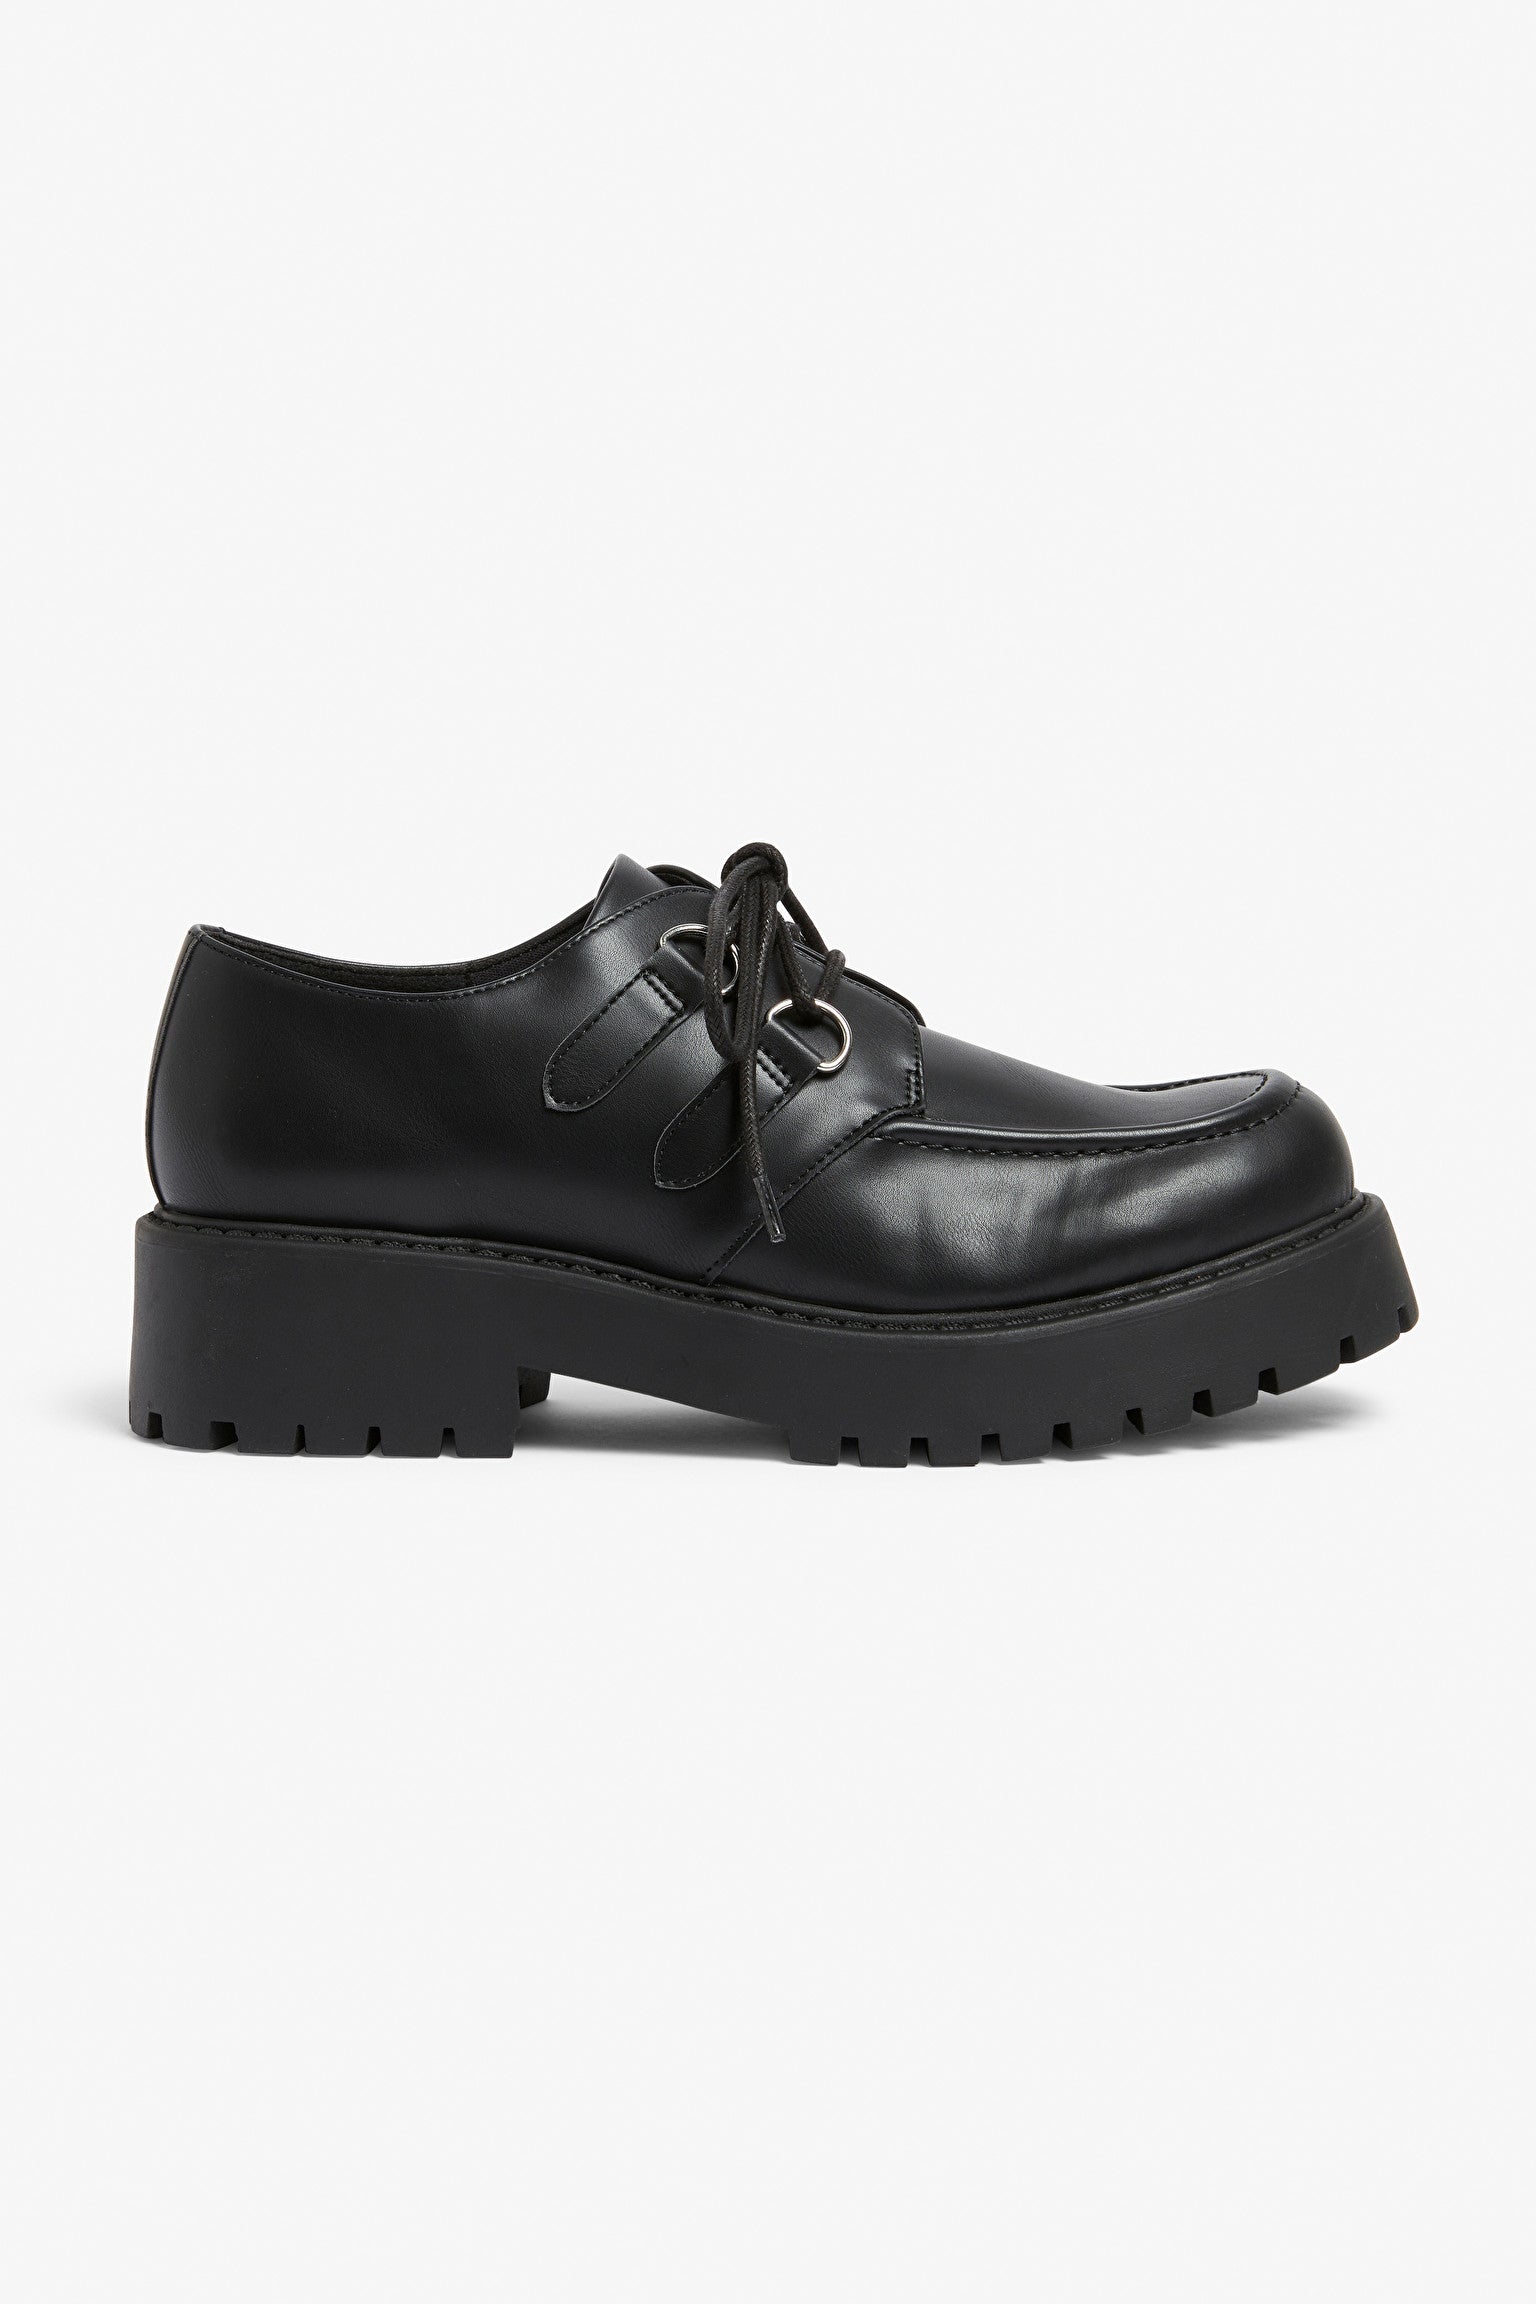 MONKI LACE-UP LEATHER SHOES IN BLACK